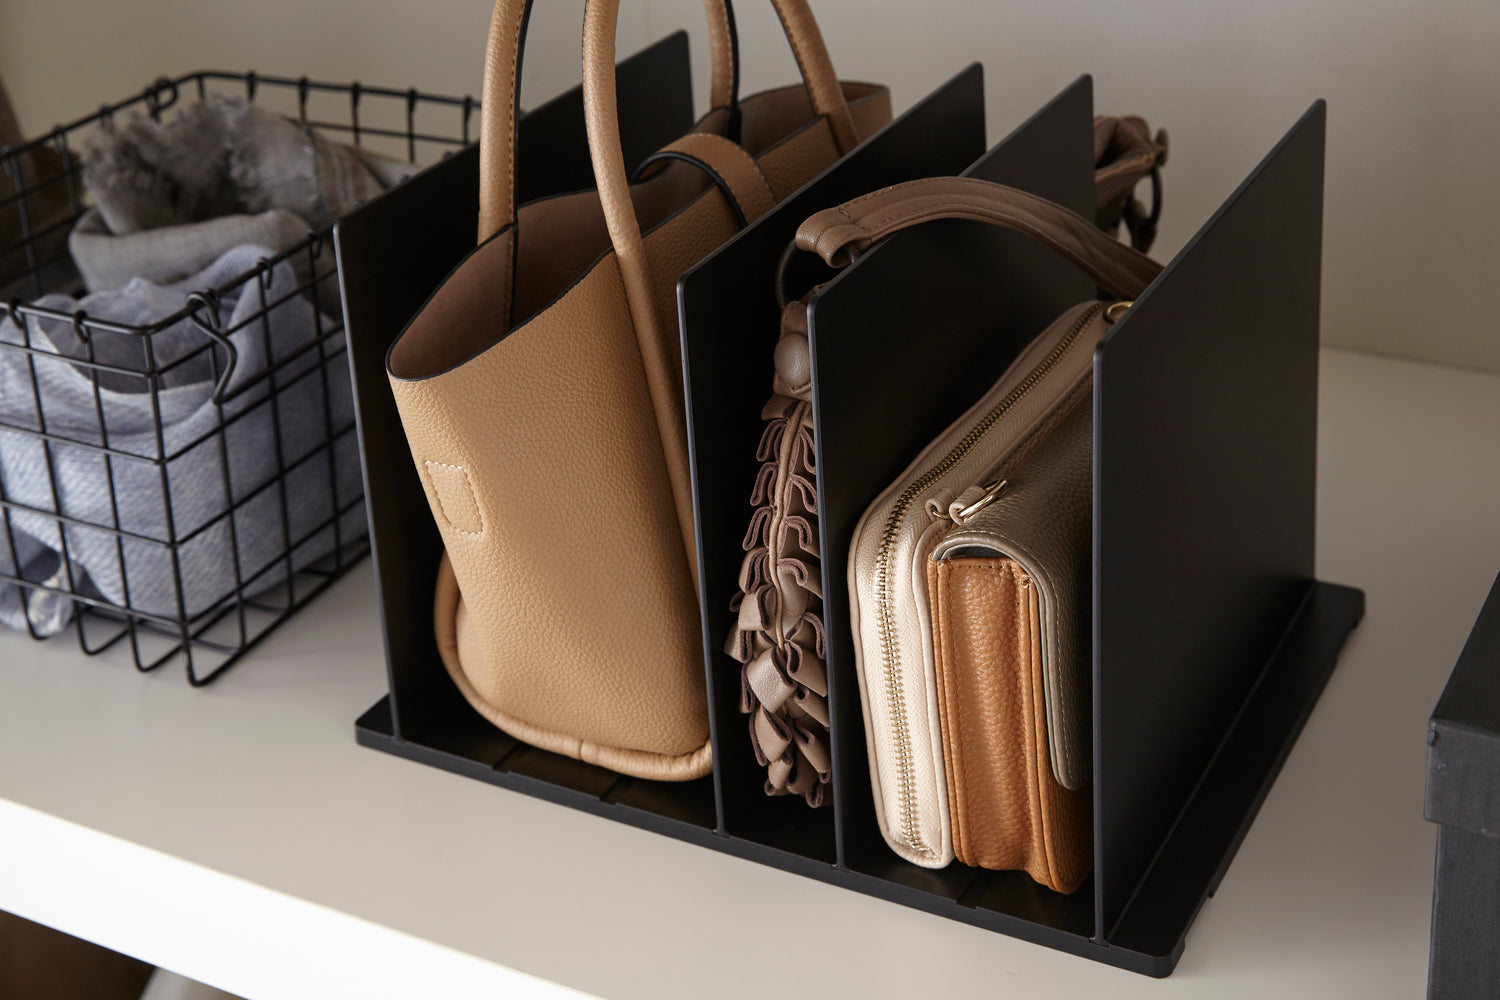 View 9 - Black Bag Organizer with Customizable Dividers holding purses by Yamazaki Home.